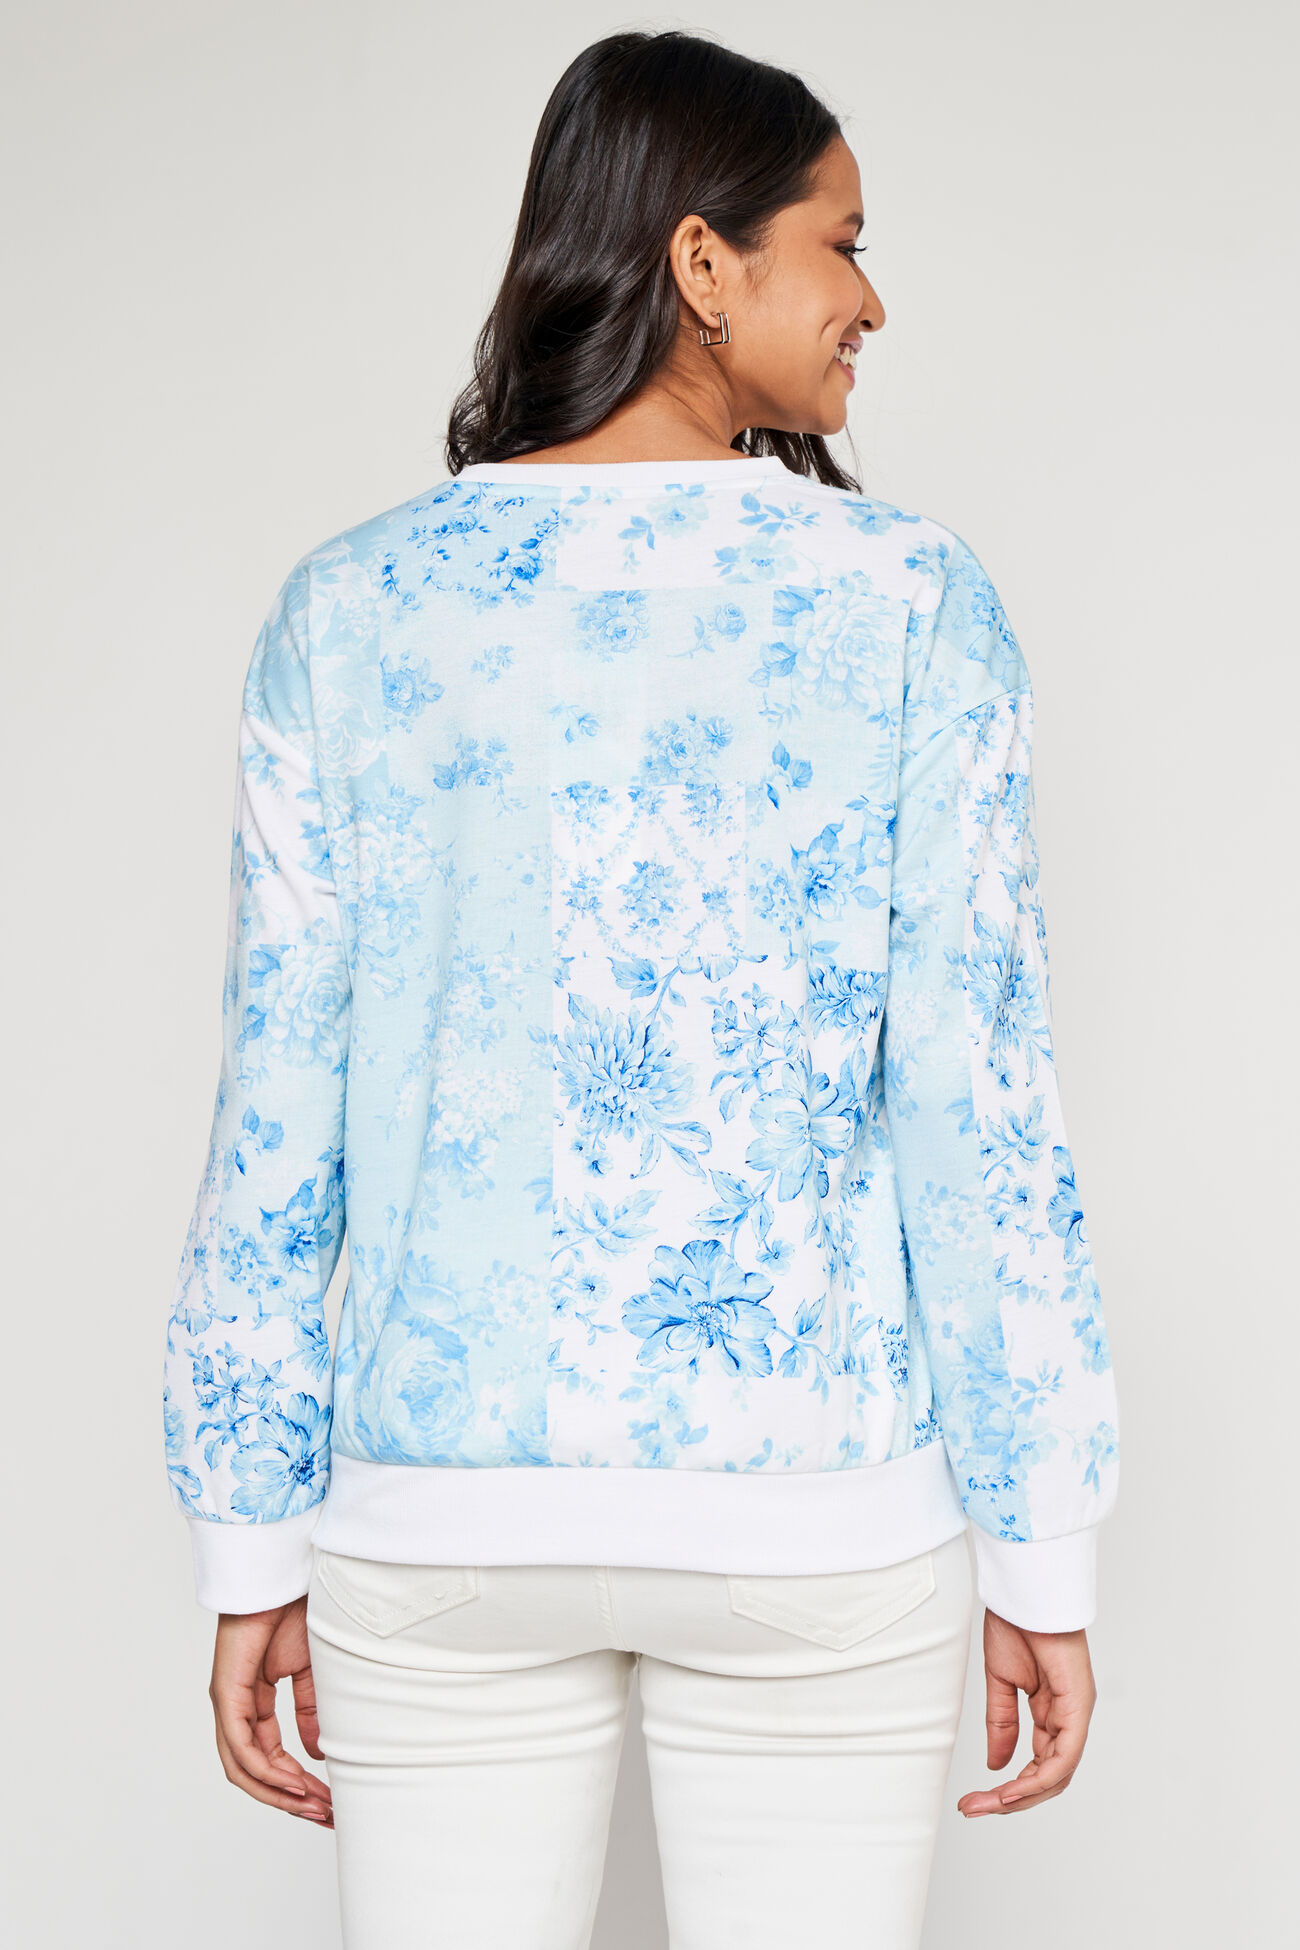 White And Blue Floral Straight Top, White, image 5